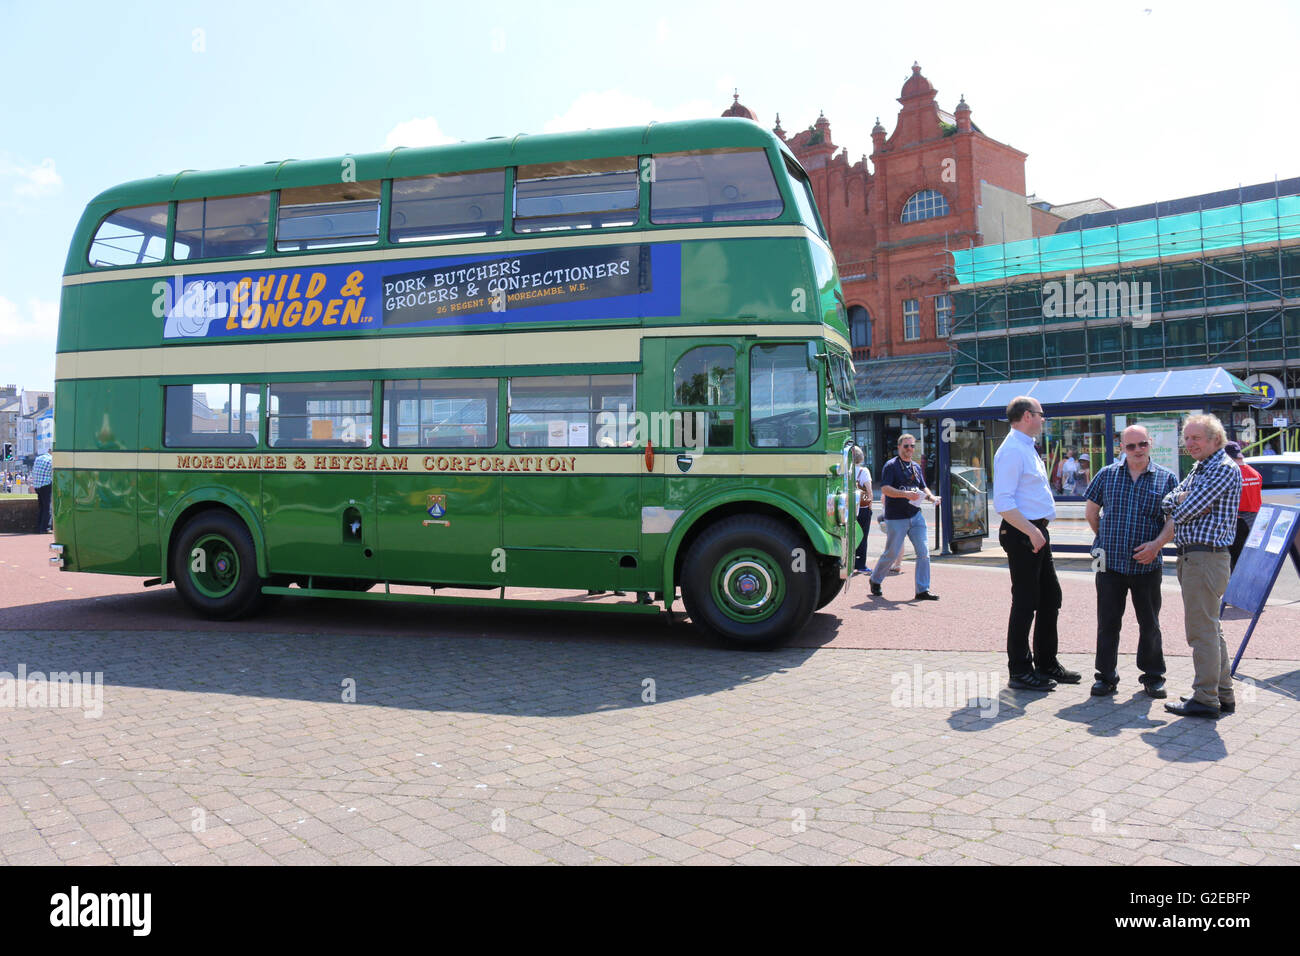 Morecambe Promenade Morecambe United Kingdom, 29th May 2016  There was a turn out of historic buses on Bank Holiday Sunday on Morecambe Promenade ranging from a 1931 Ribble Leyland Lion bus through to a present day wi if equipped Stagecoach double decker Gold bus.  As part of the event there where bus trips along Morecambe's promenade in the vintage buses from outside the resorts famous Winter Gardens Theatre Credit:  David Billinge/Alamy Live News Stock Photo